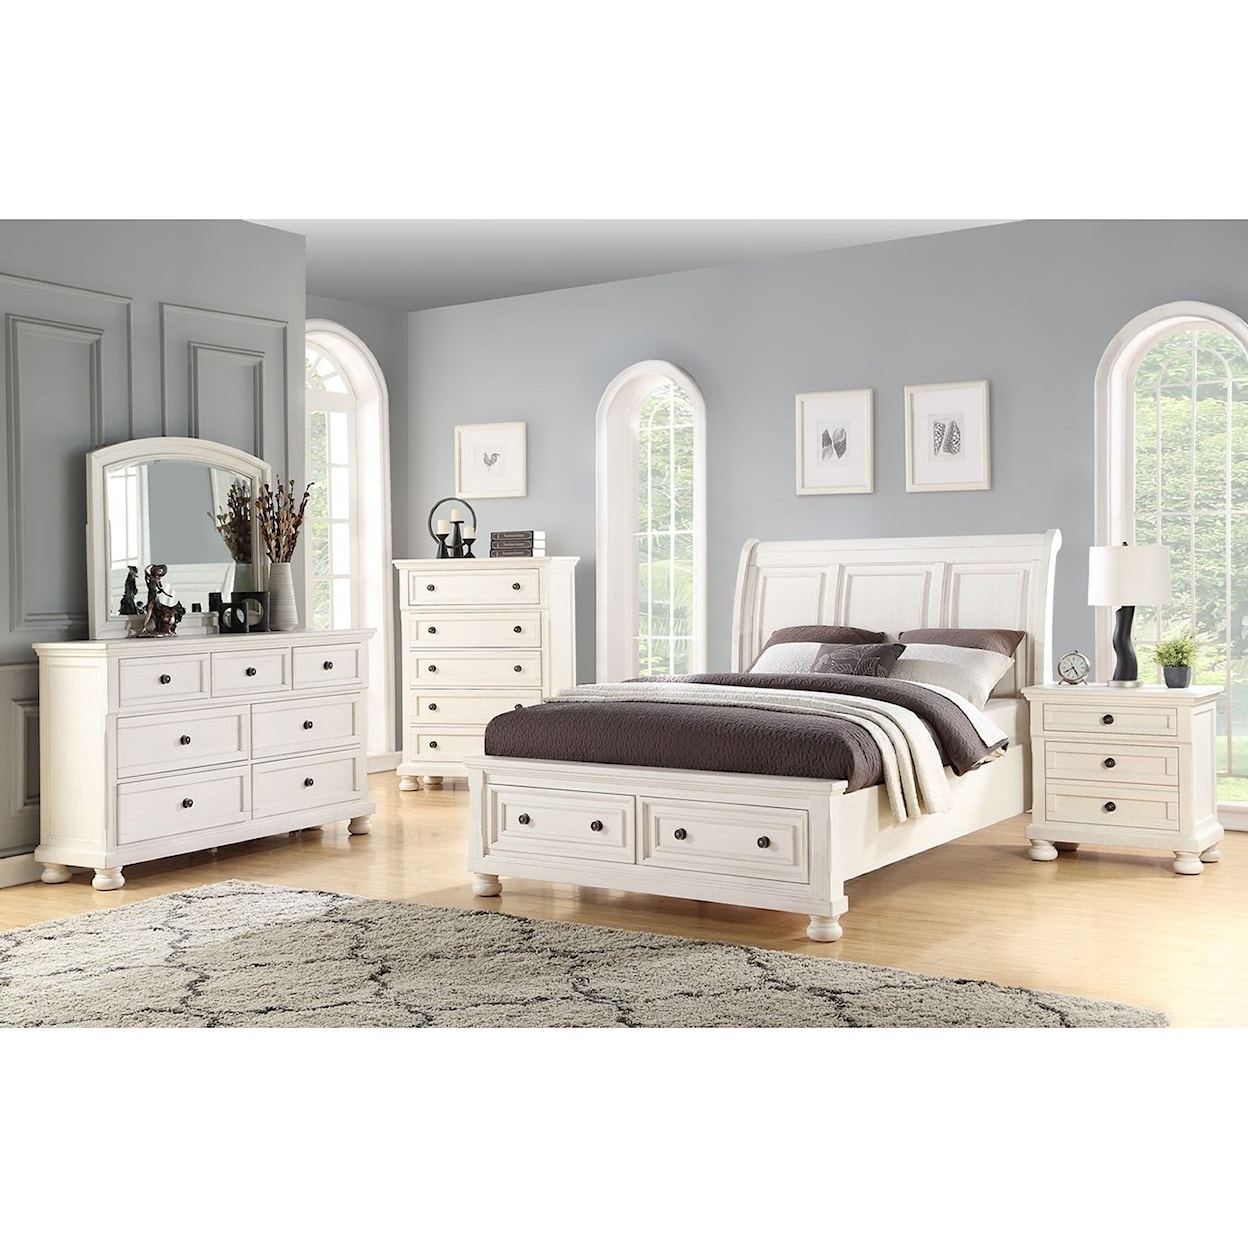 Avalon Furniture Stella Queen Bedroom Group